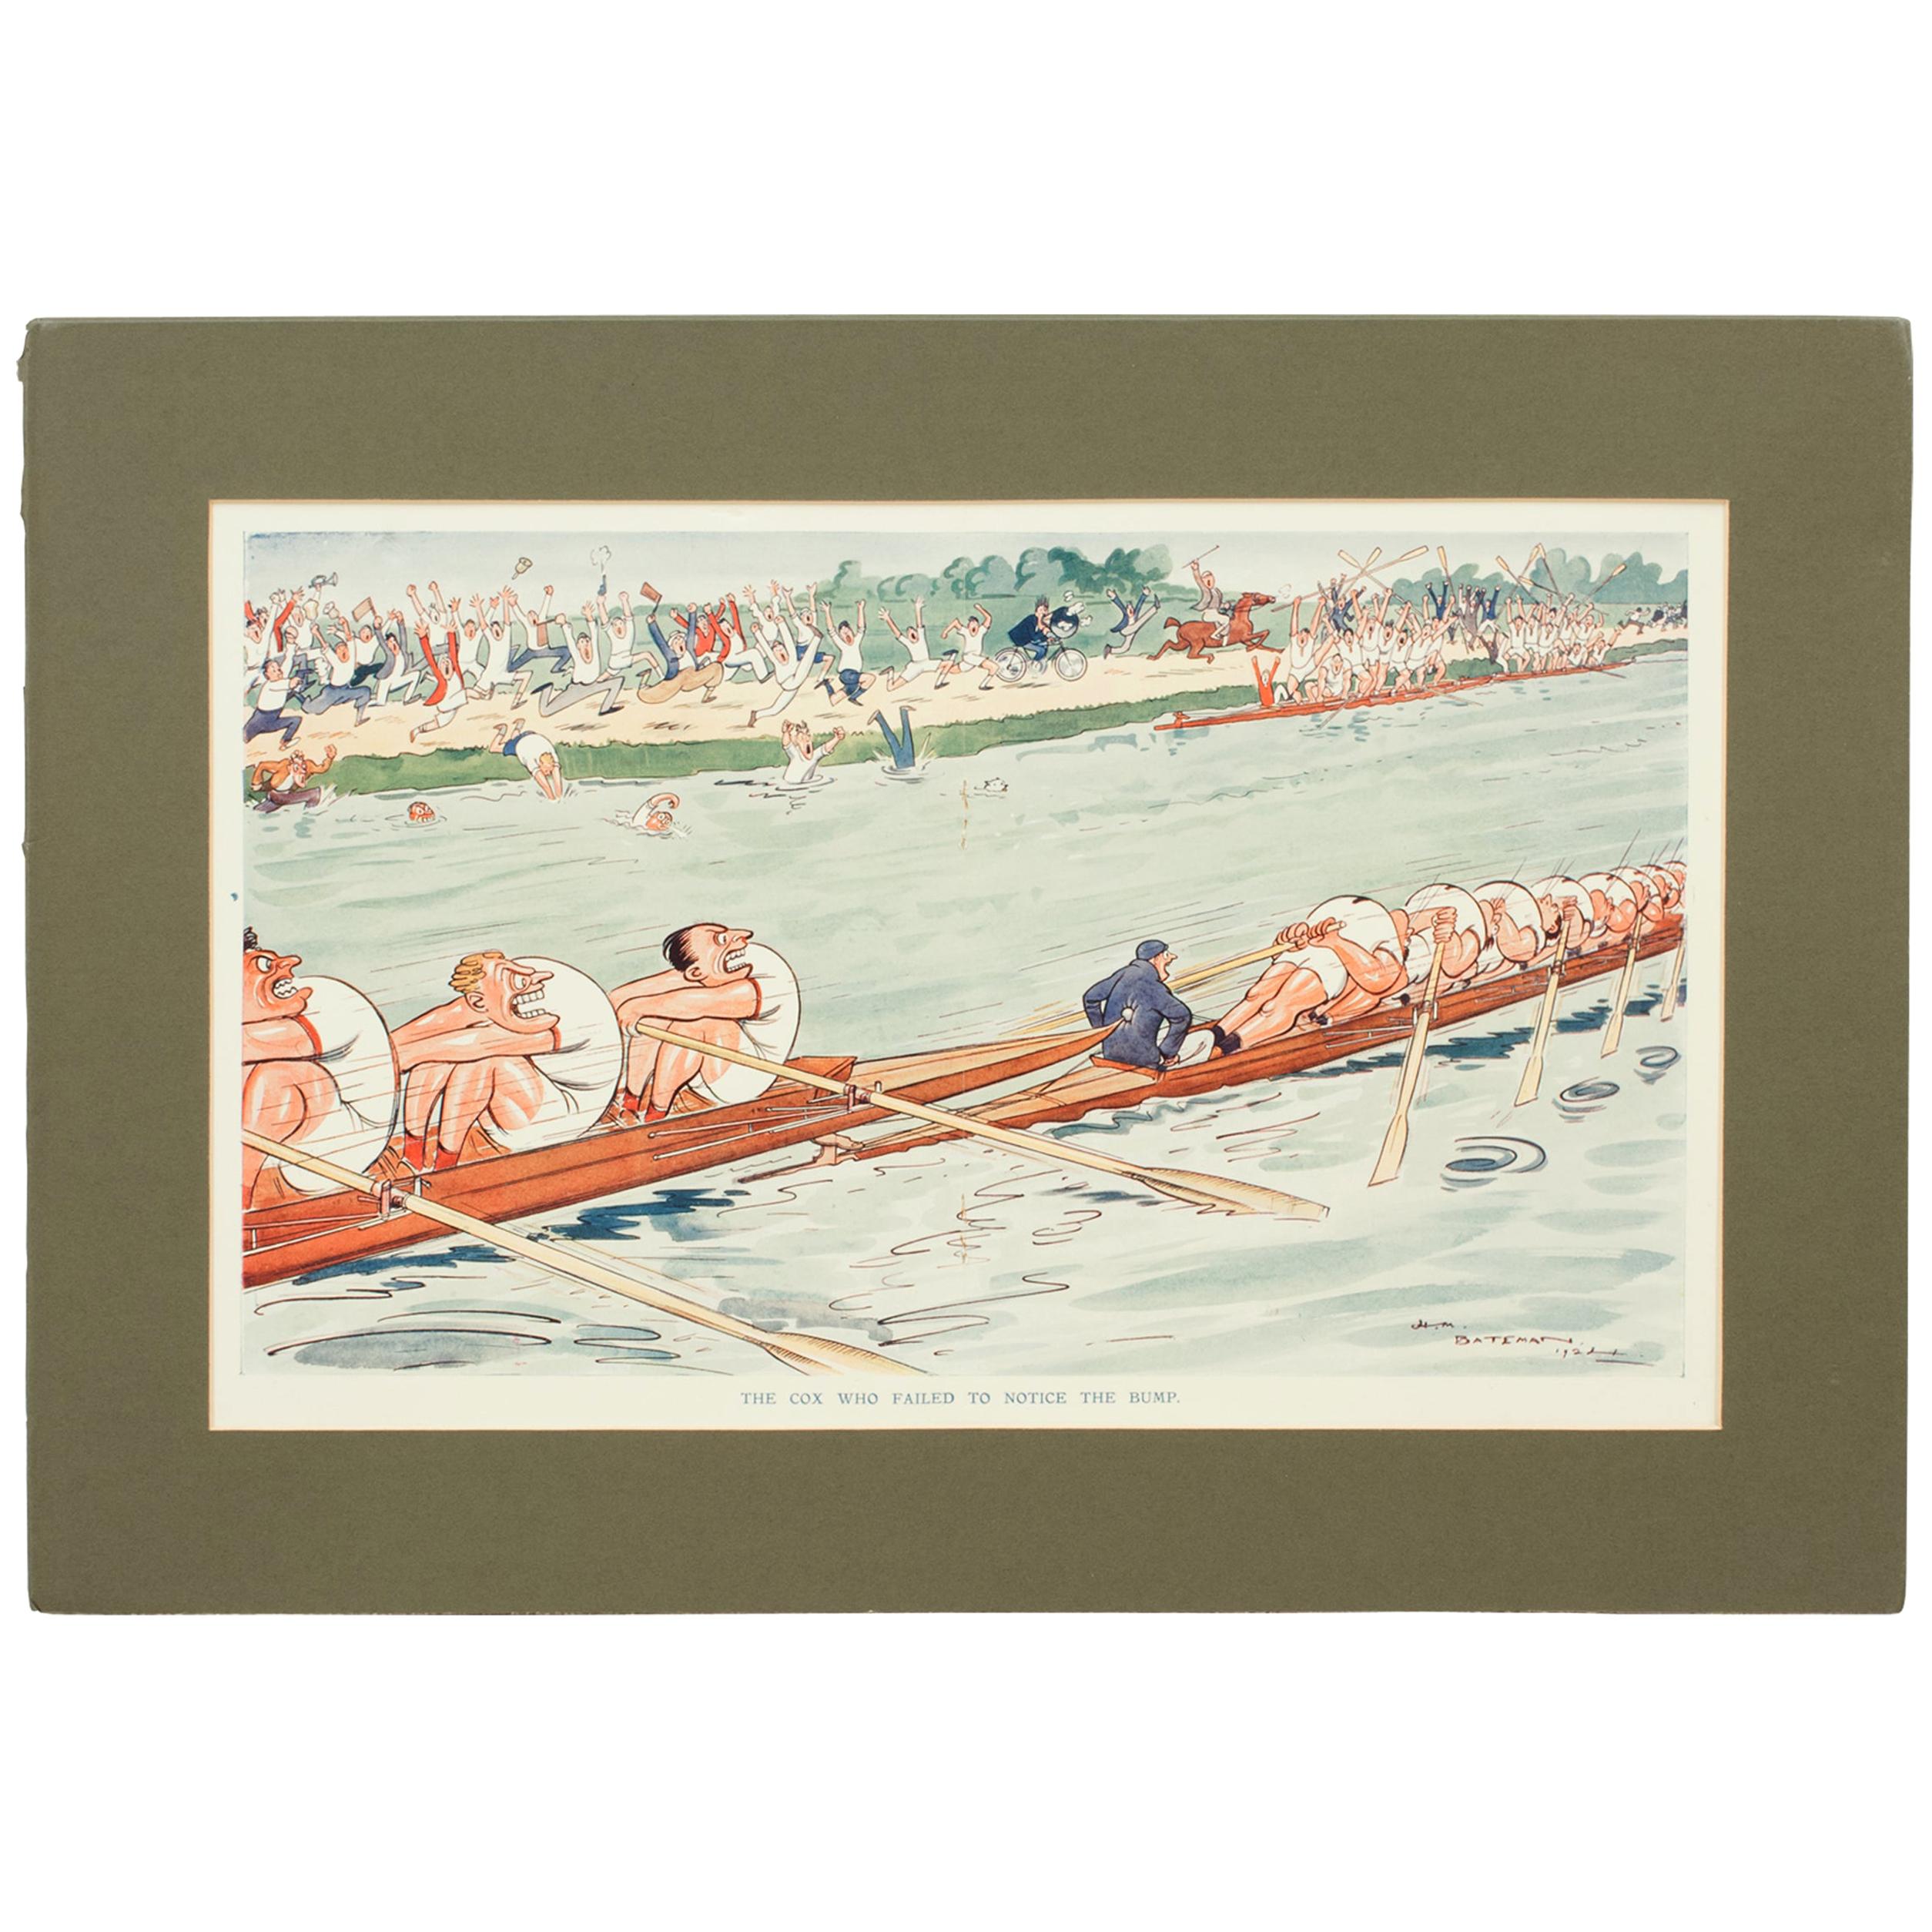 Rowing Print, The Cox Who Failed To Notice The Bump, H M Bateman